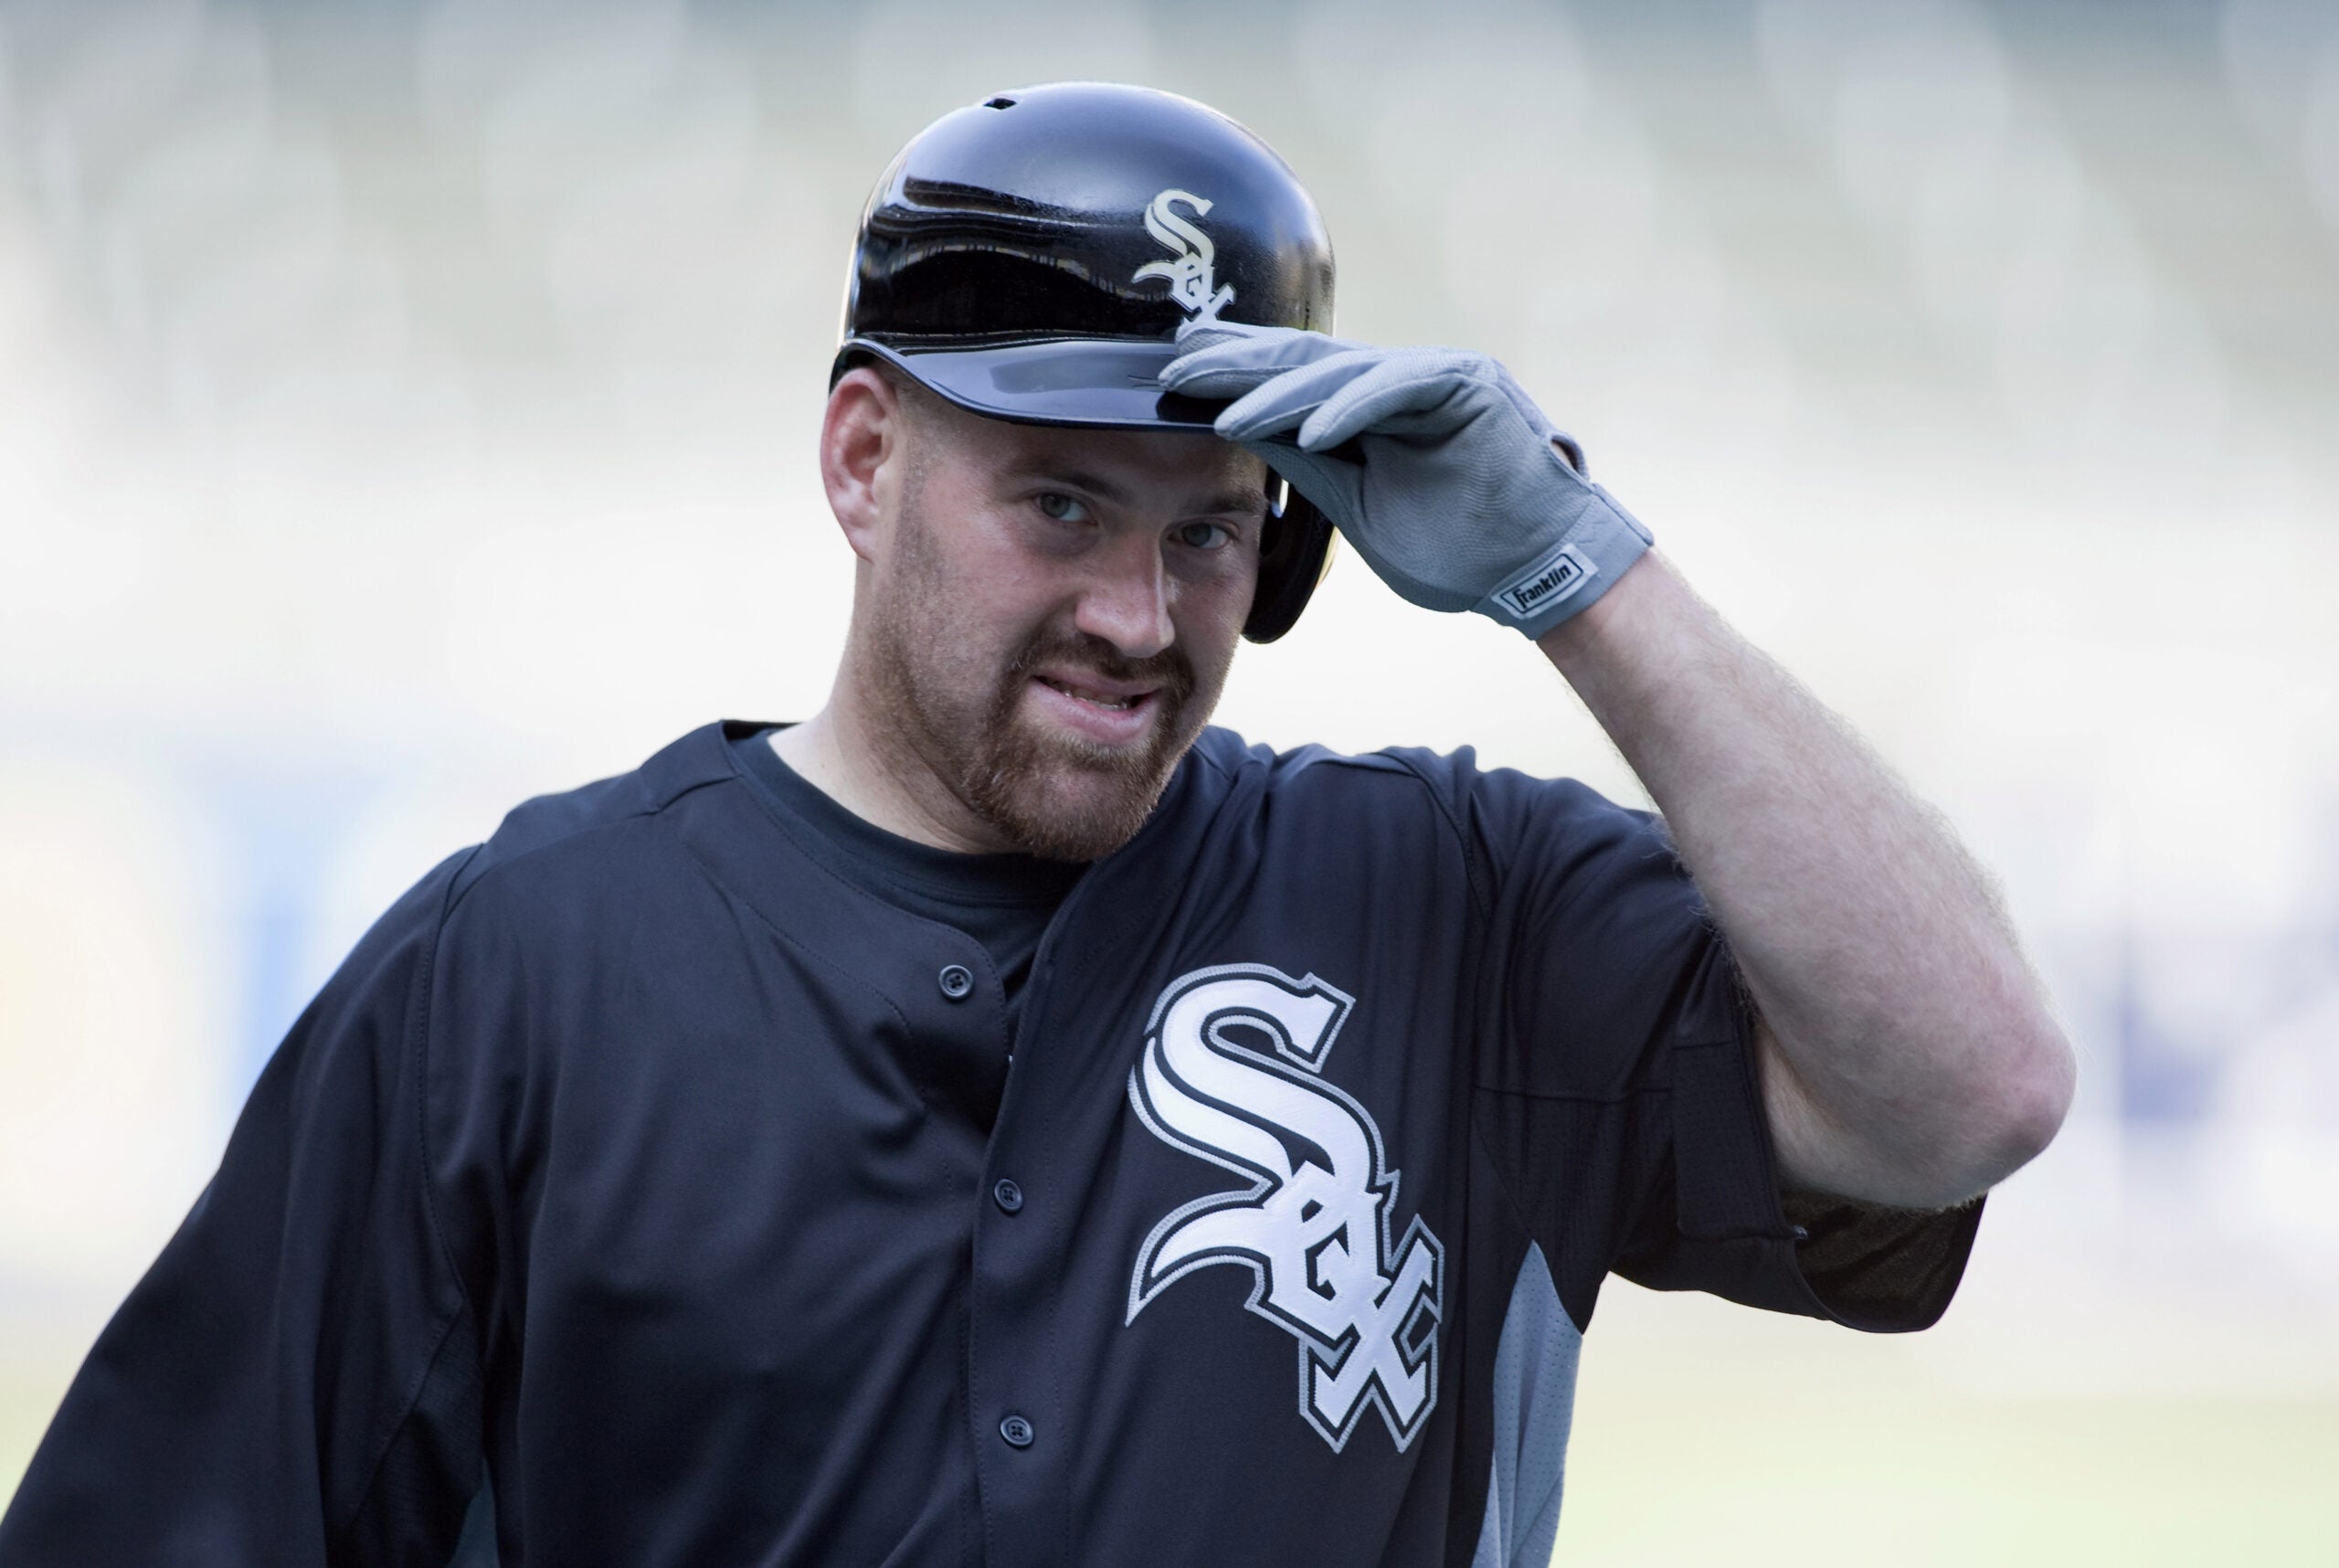 Kevin Youkilis and Yankees reach a one-year deal